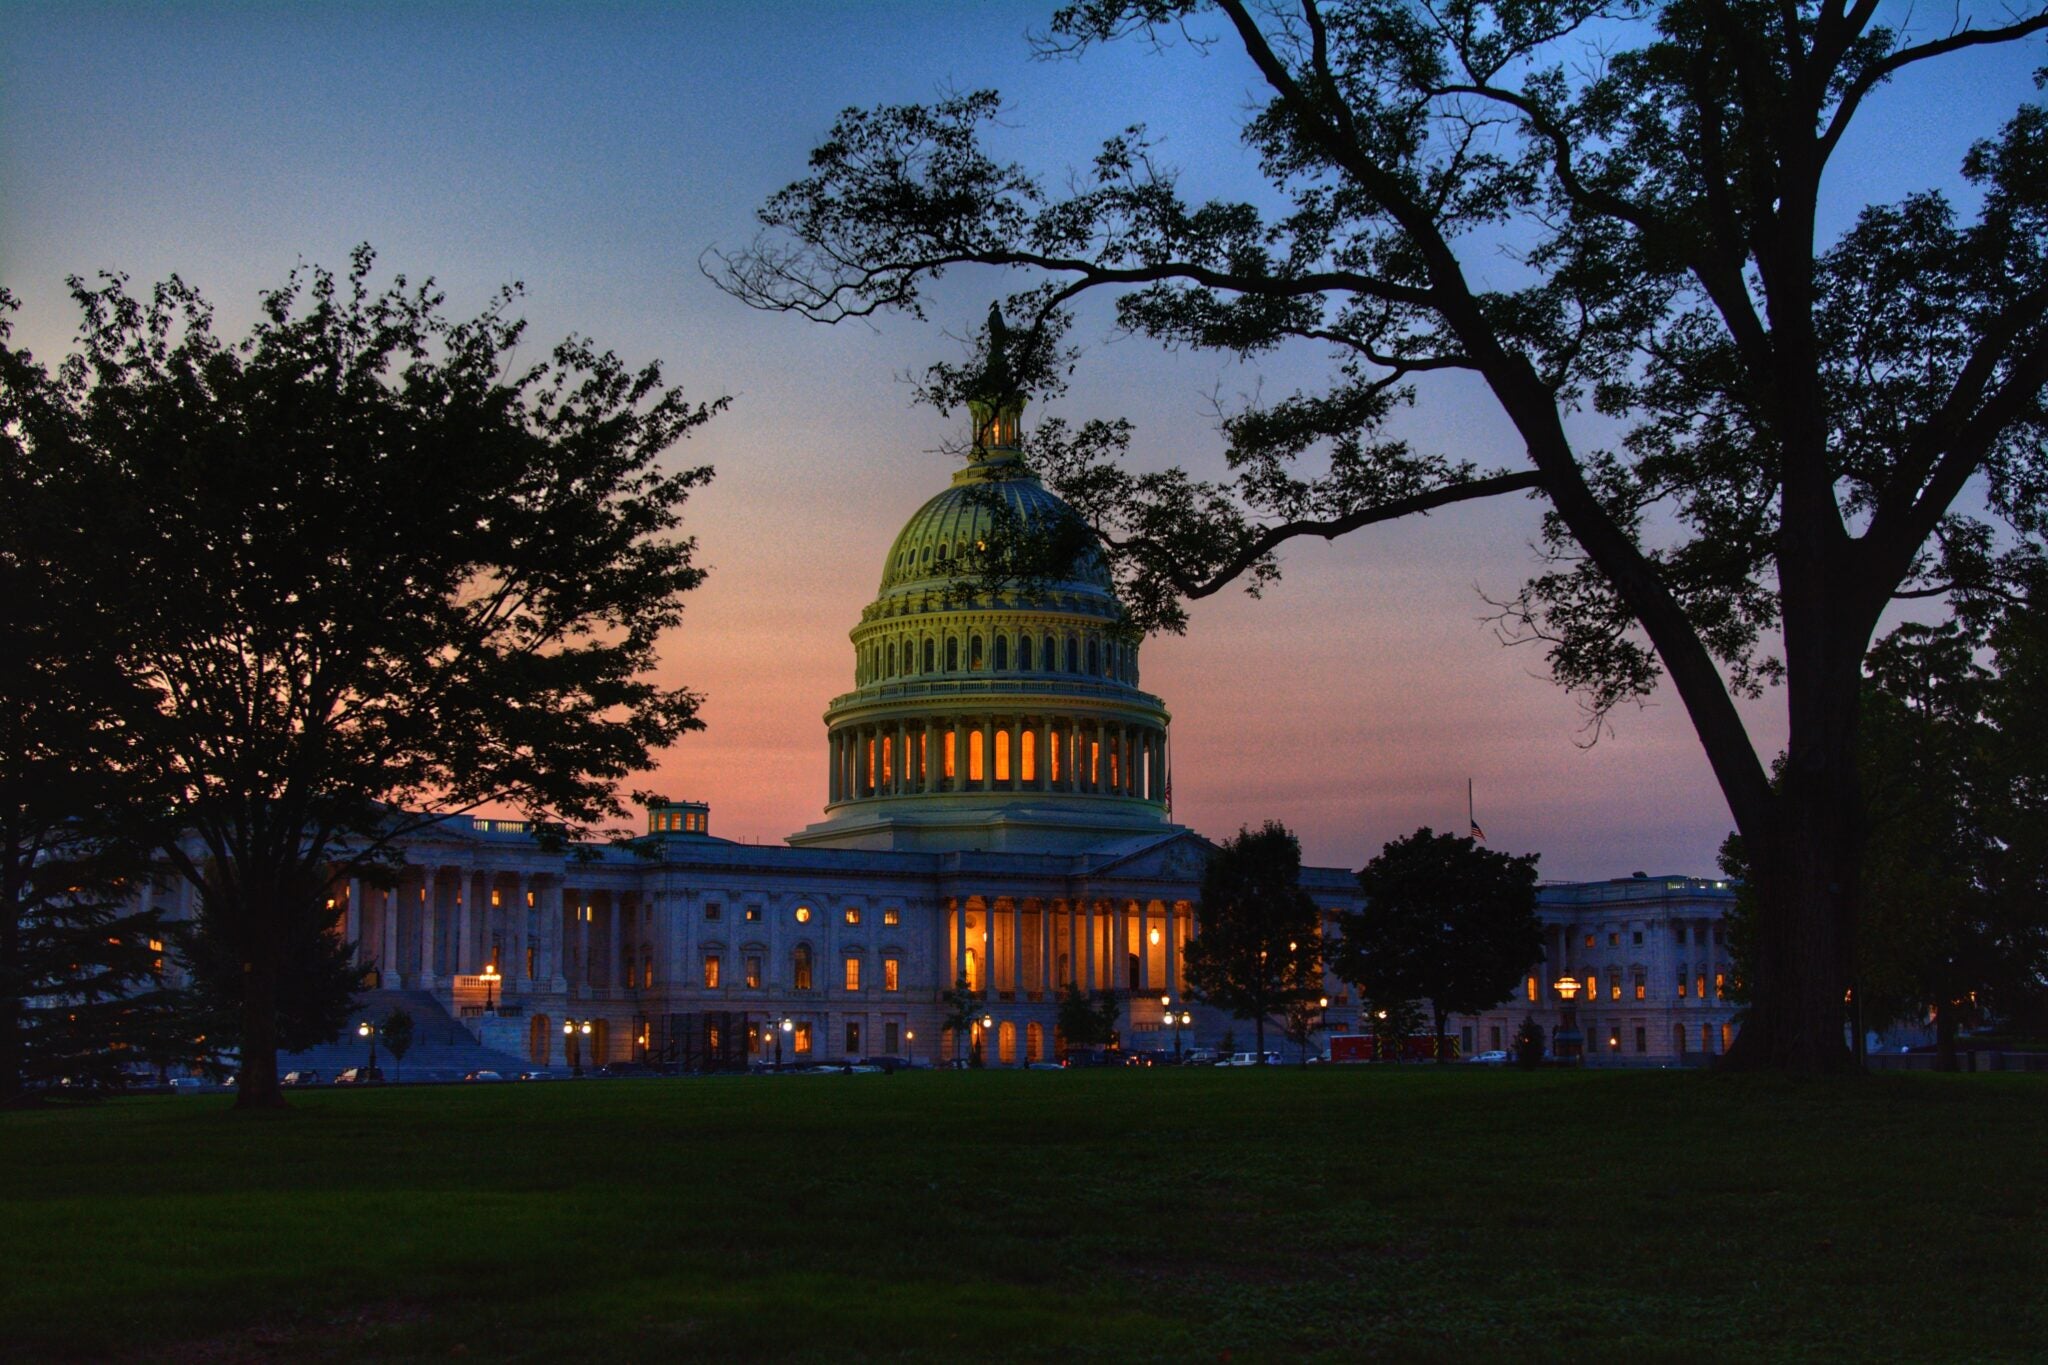 An image of the United States capitol building in Washington D.C. at sunset.